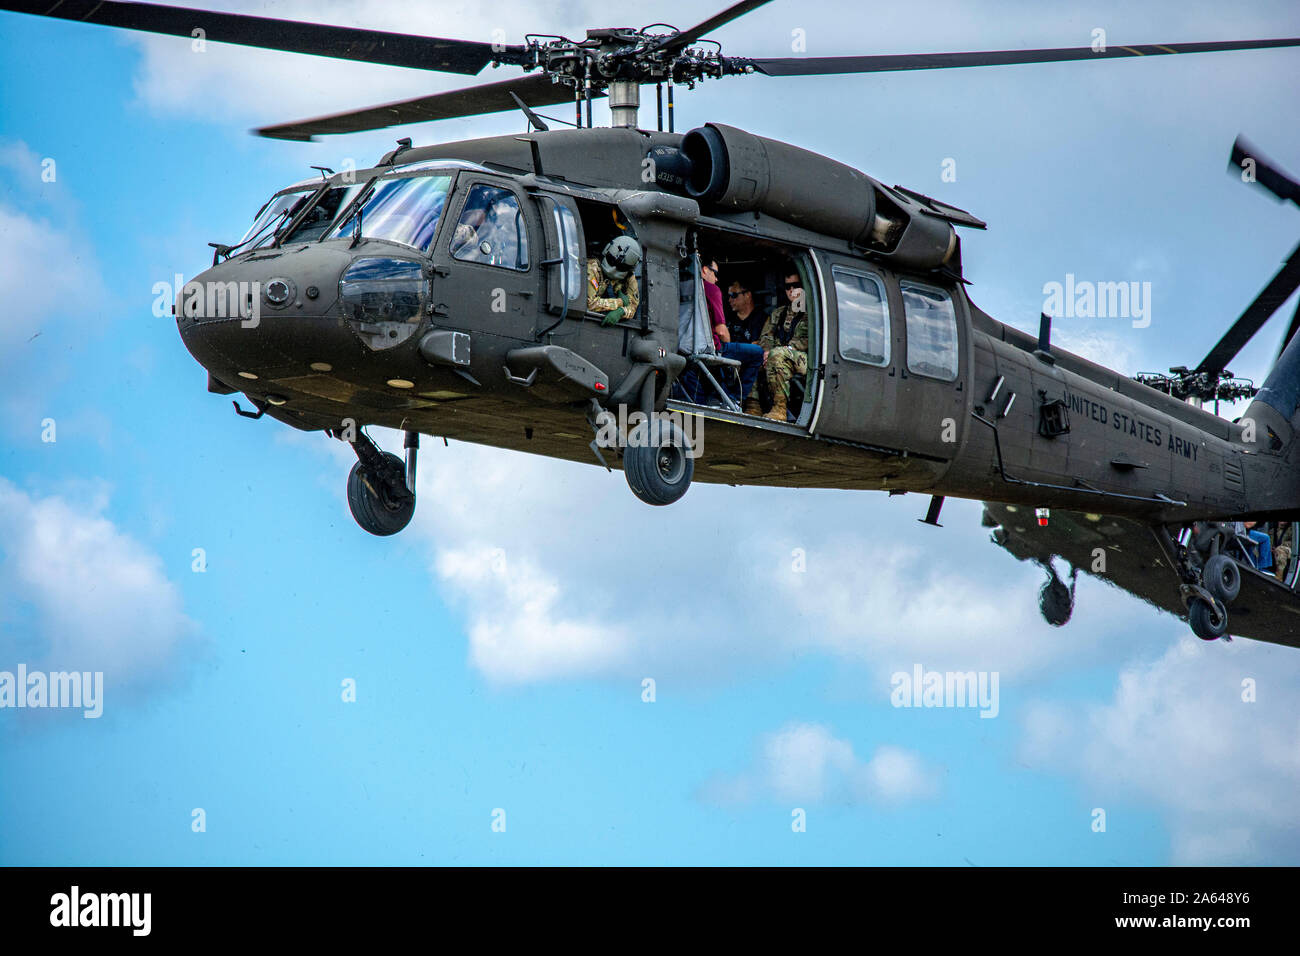 Civilian employers who participated in the Employee Support of Guard and Reserve (ESGR) Boss Lift, hosted by 1st Battalion, 158th Aviation Regiment, 11th Expeditionary Combat Aviation Brigade, got the opportunity to fly in a UH-60 Black Hawk helicopter on Oct. 19, in Conroe, Texas. Stock Photo